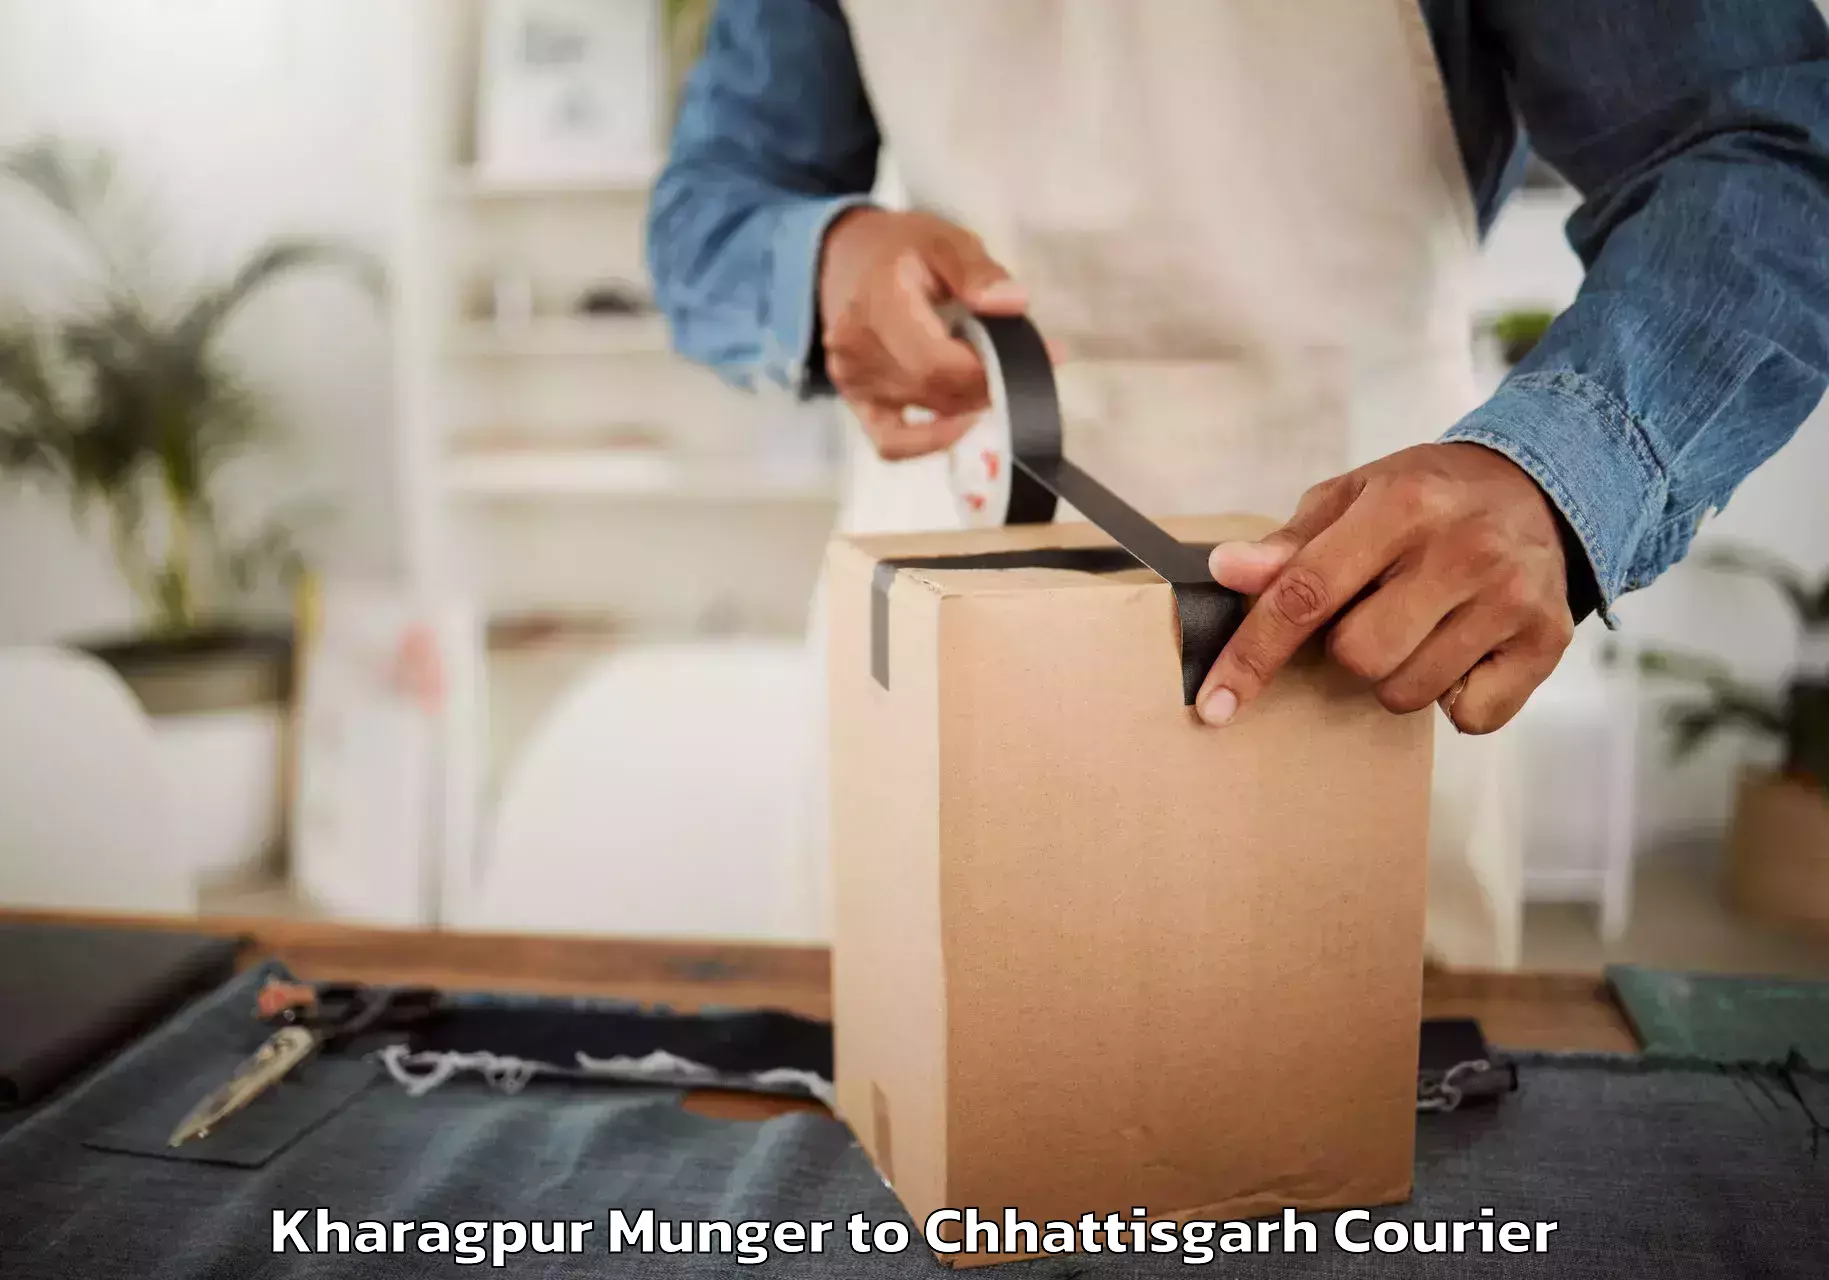 Furniture relocation services in Kharagpur Munger to bagbahra